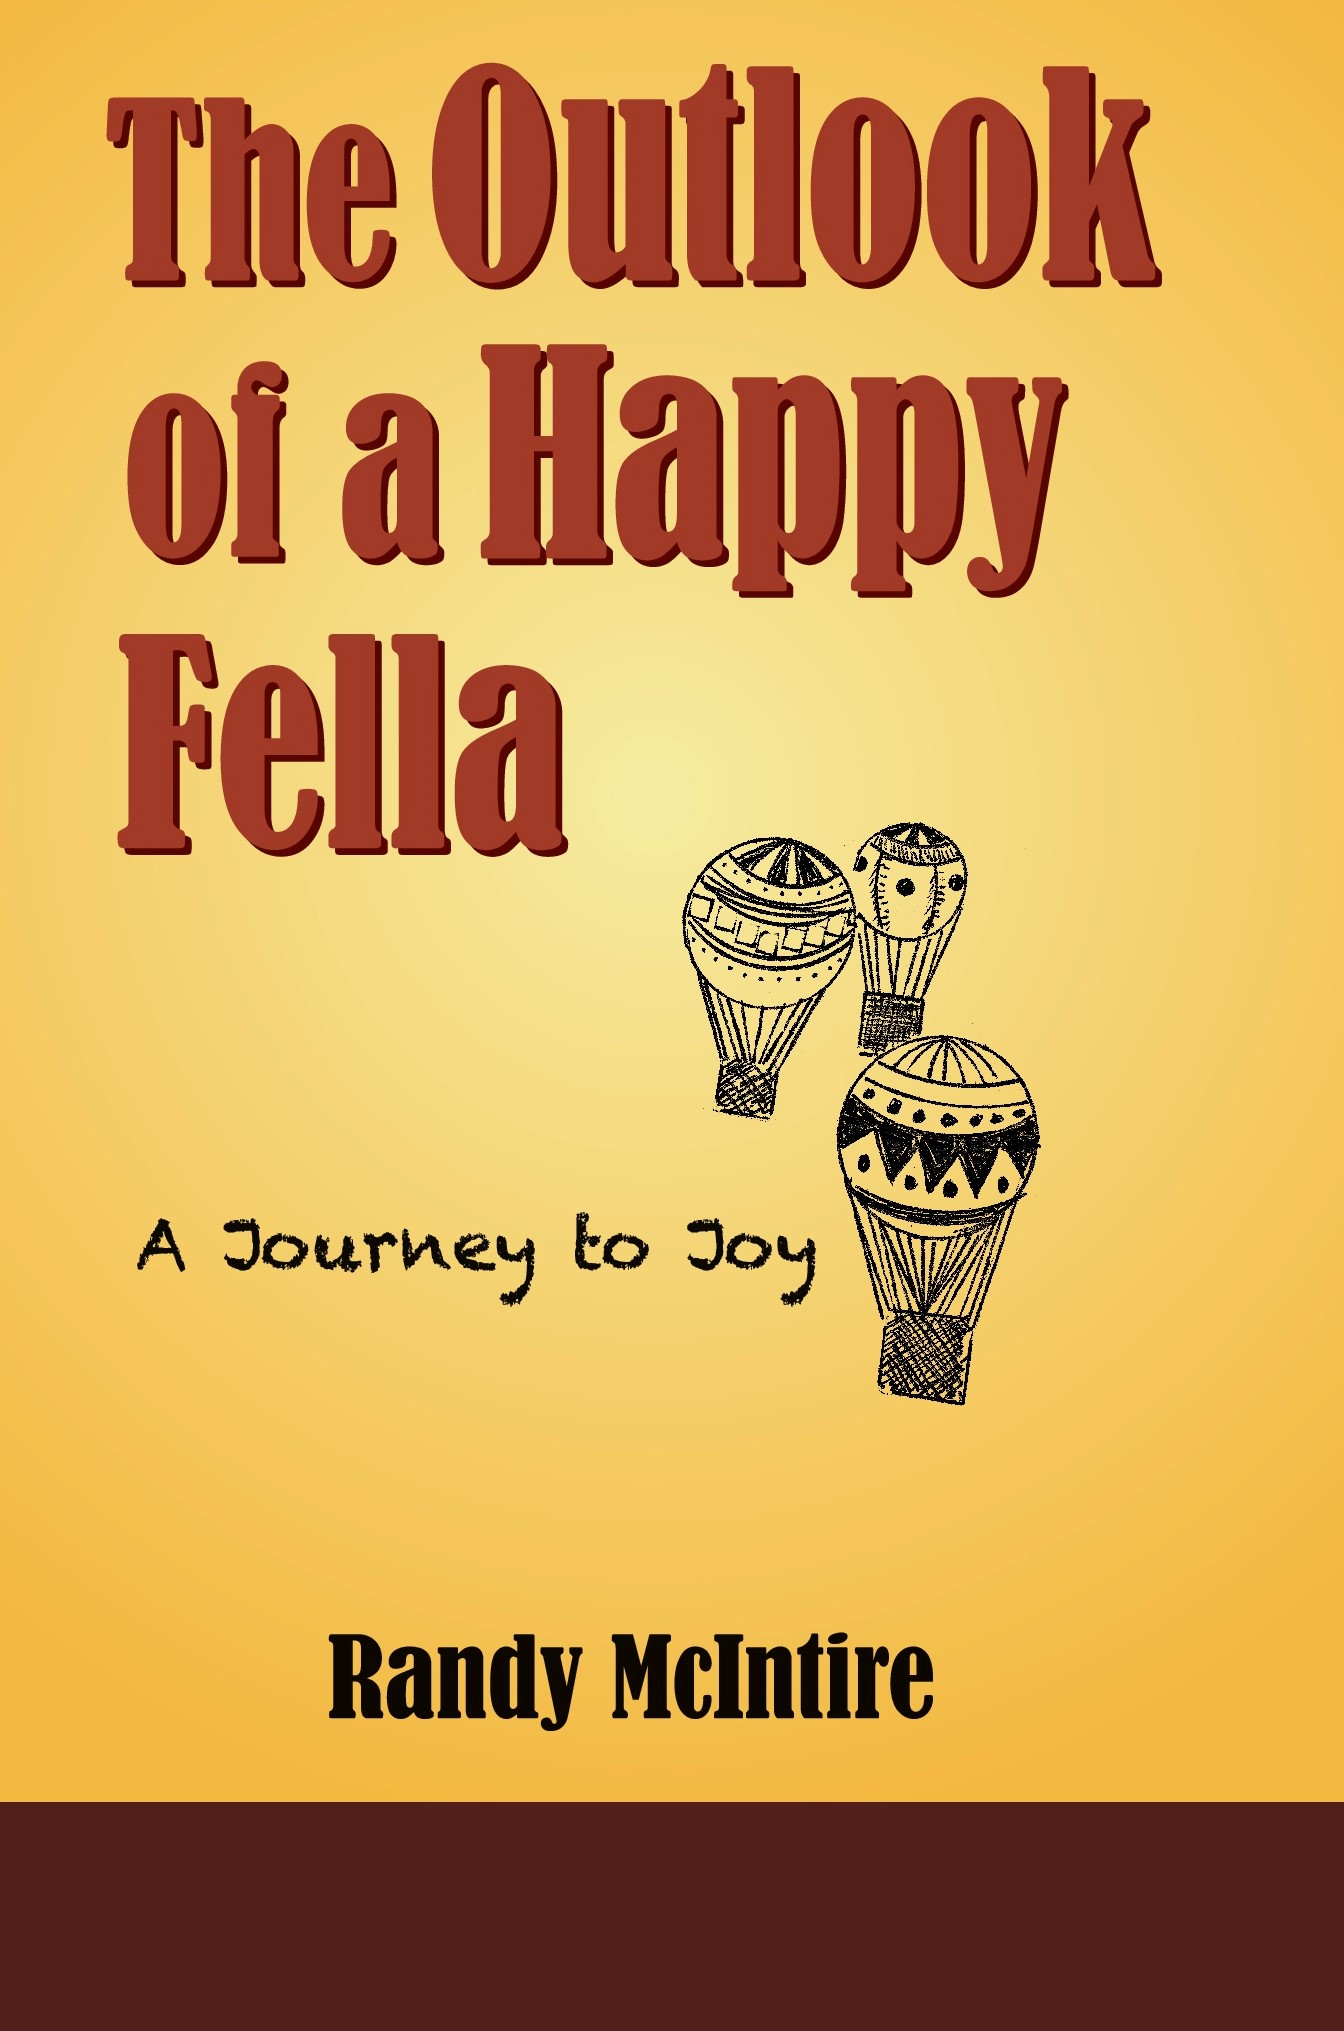 FREE: The Outlook of a Happy Fella- A Journey to Joy by Randy McIntire